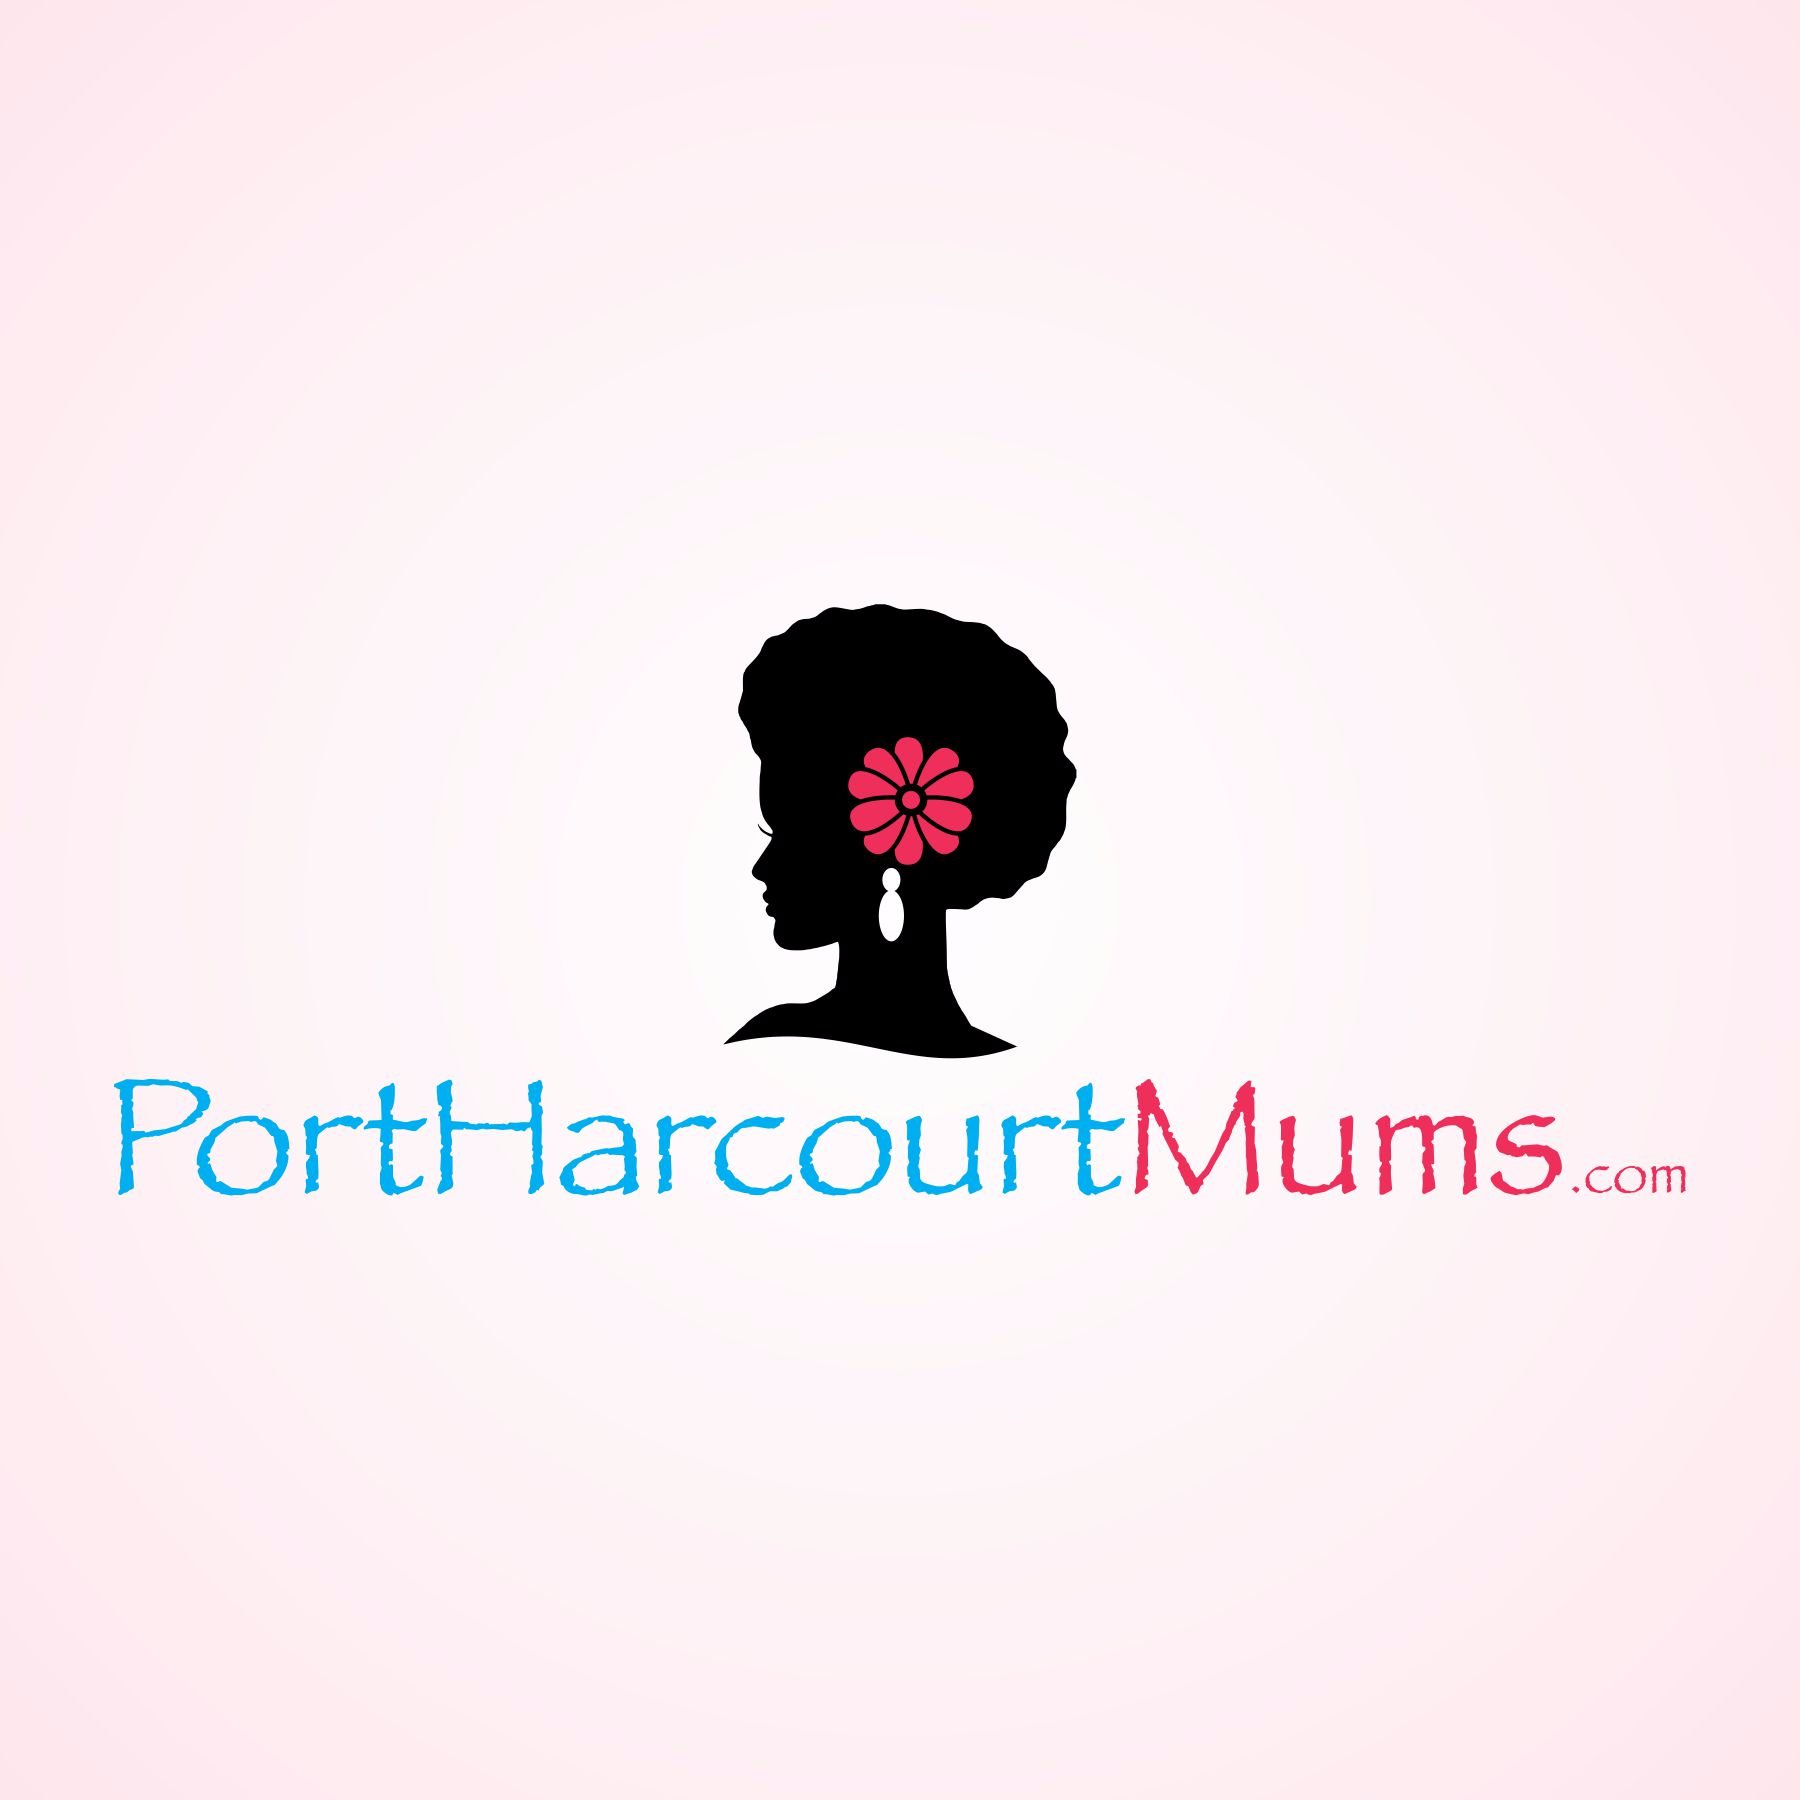 Resource and Support for Mums & Families in PortHarcourt.  Motherhood, Business, Career, Family, Health & more #portharcourtmums